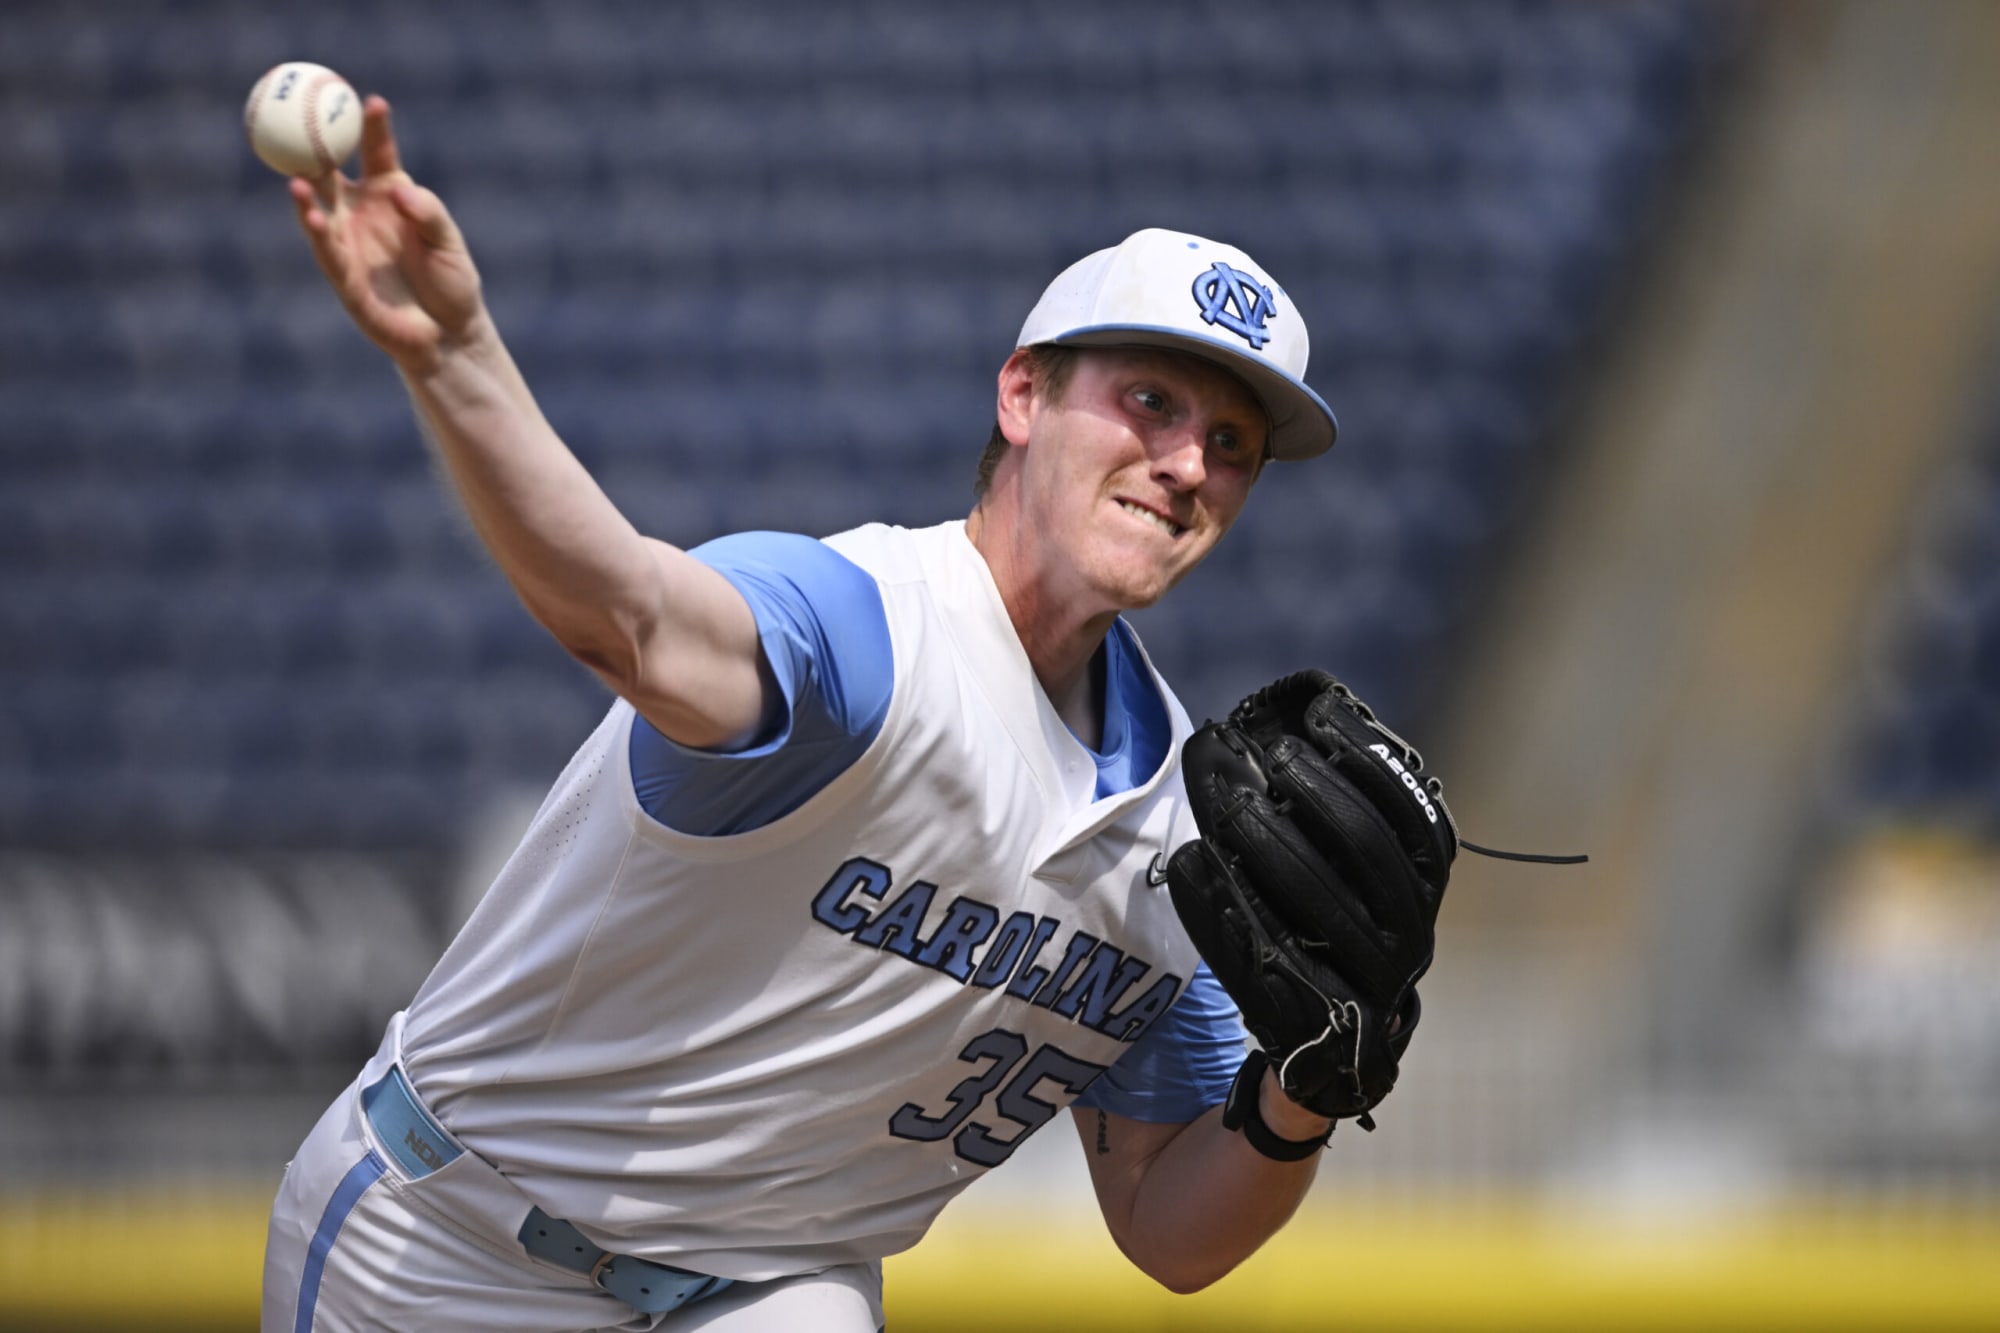 UNC Baseball falls to Iowa-How to watch as Tar Heels face elimination  against Wright State - Tar Heel Blog